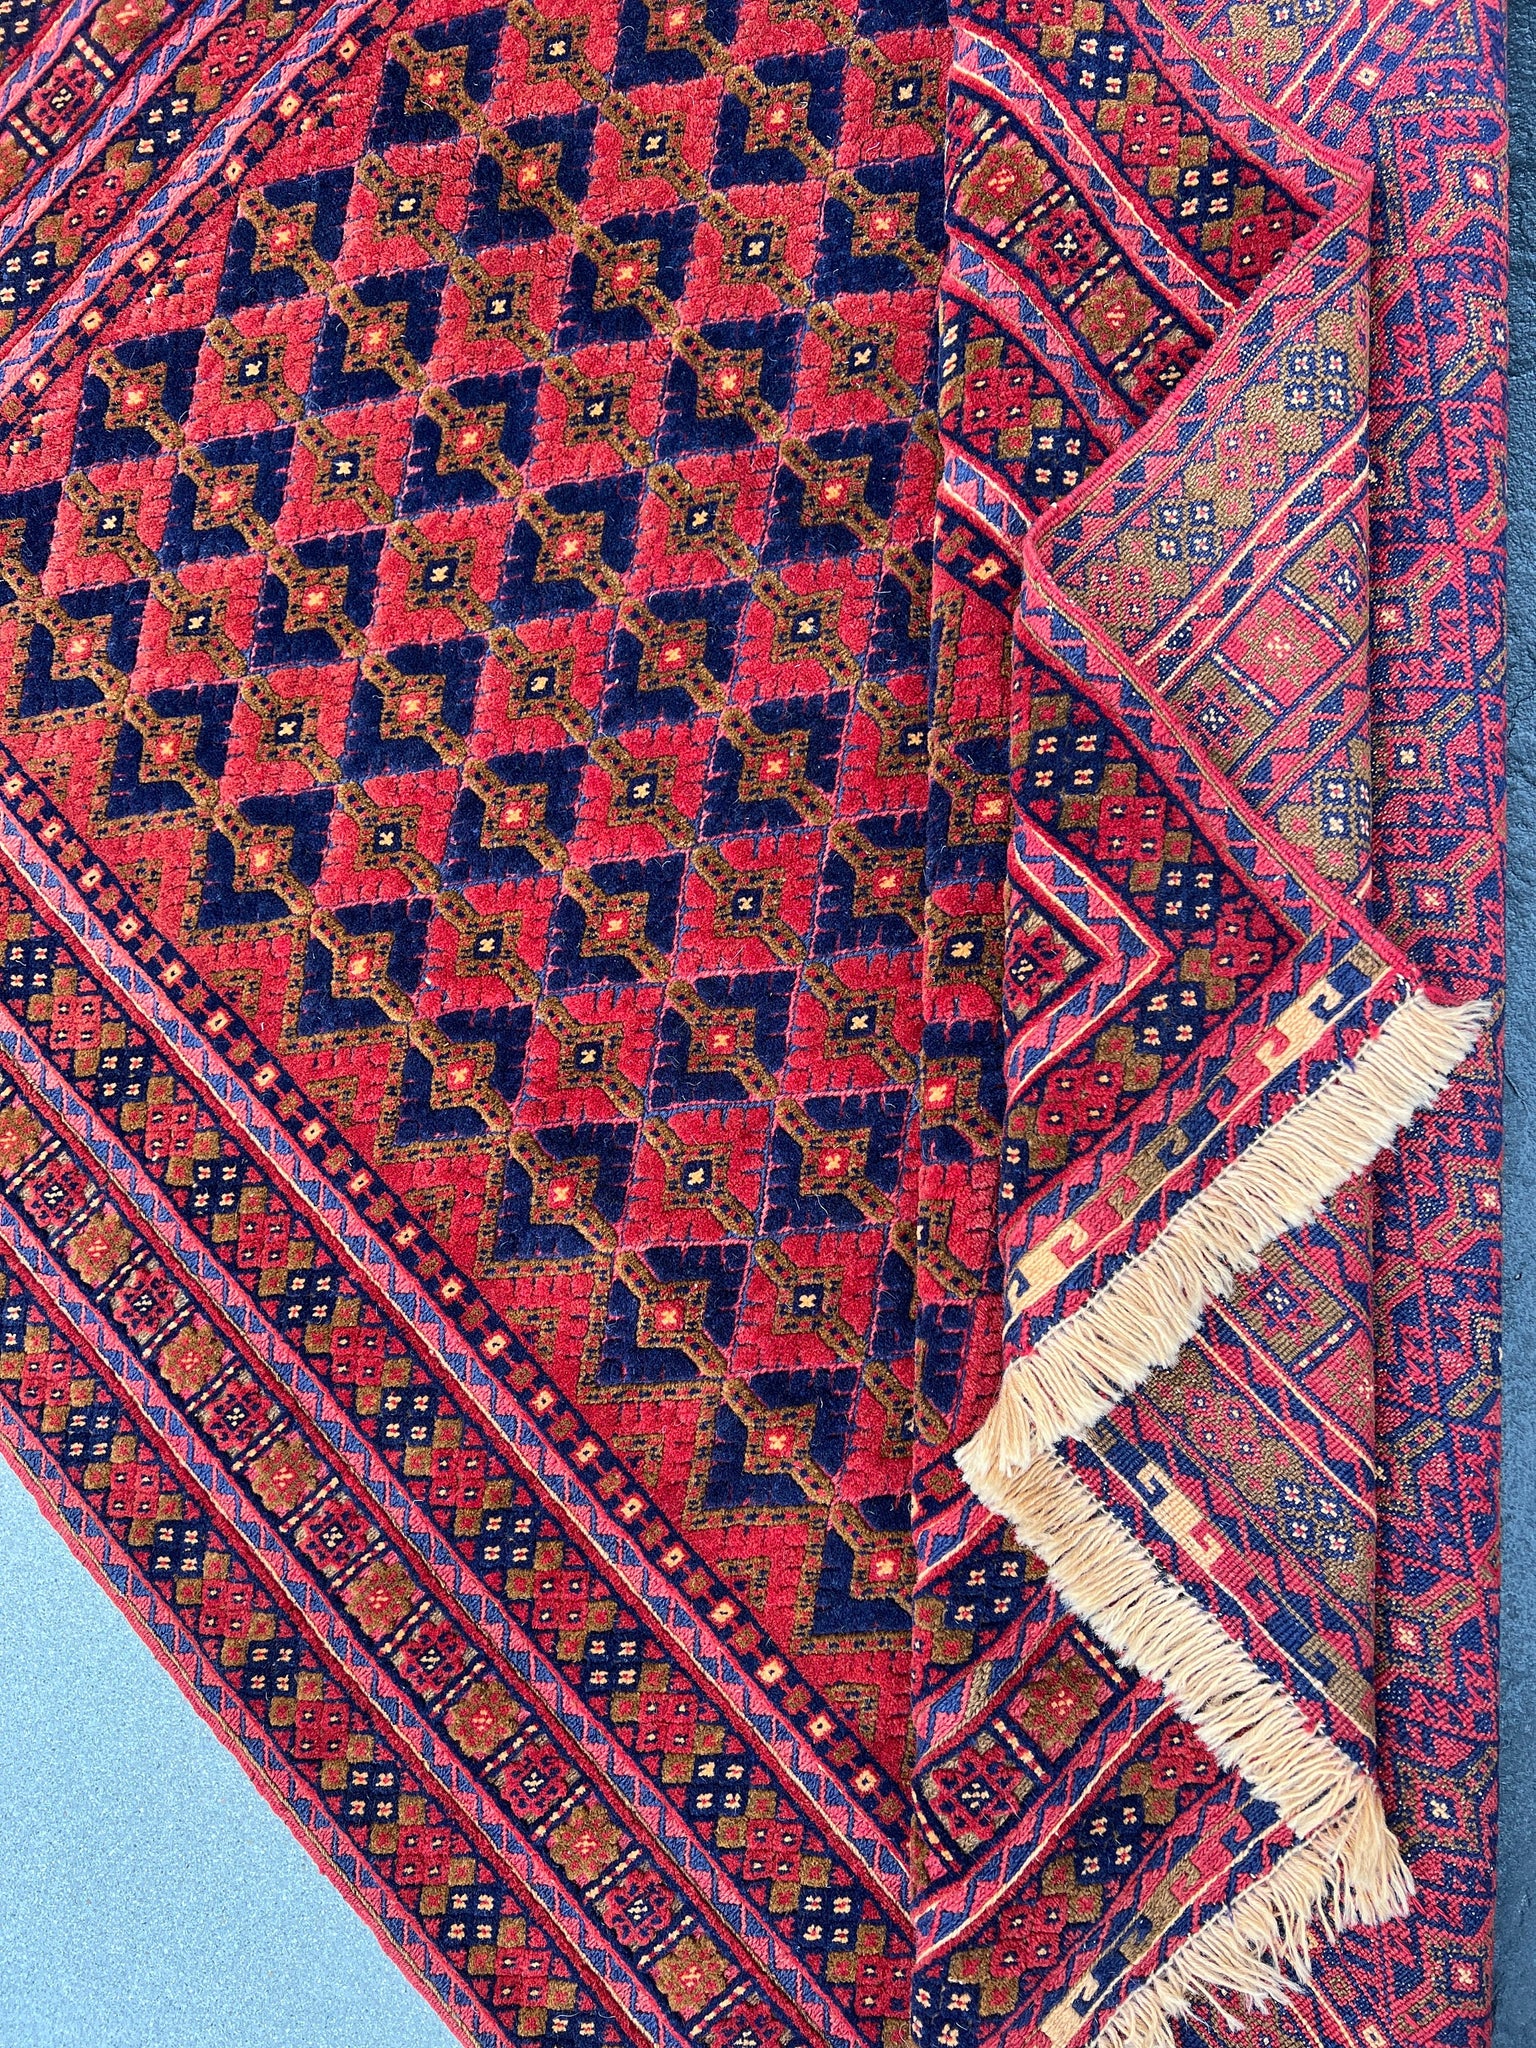 5x6 (150x215) Handmade Vintage Baluch Afghan Rug | Blood Crimson Red Navy Blue Taupe Chocolate Orange Olive Green | Hand Knotted Wool